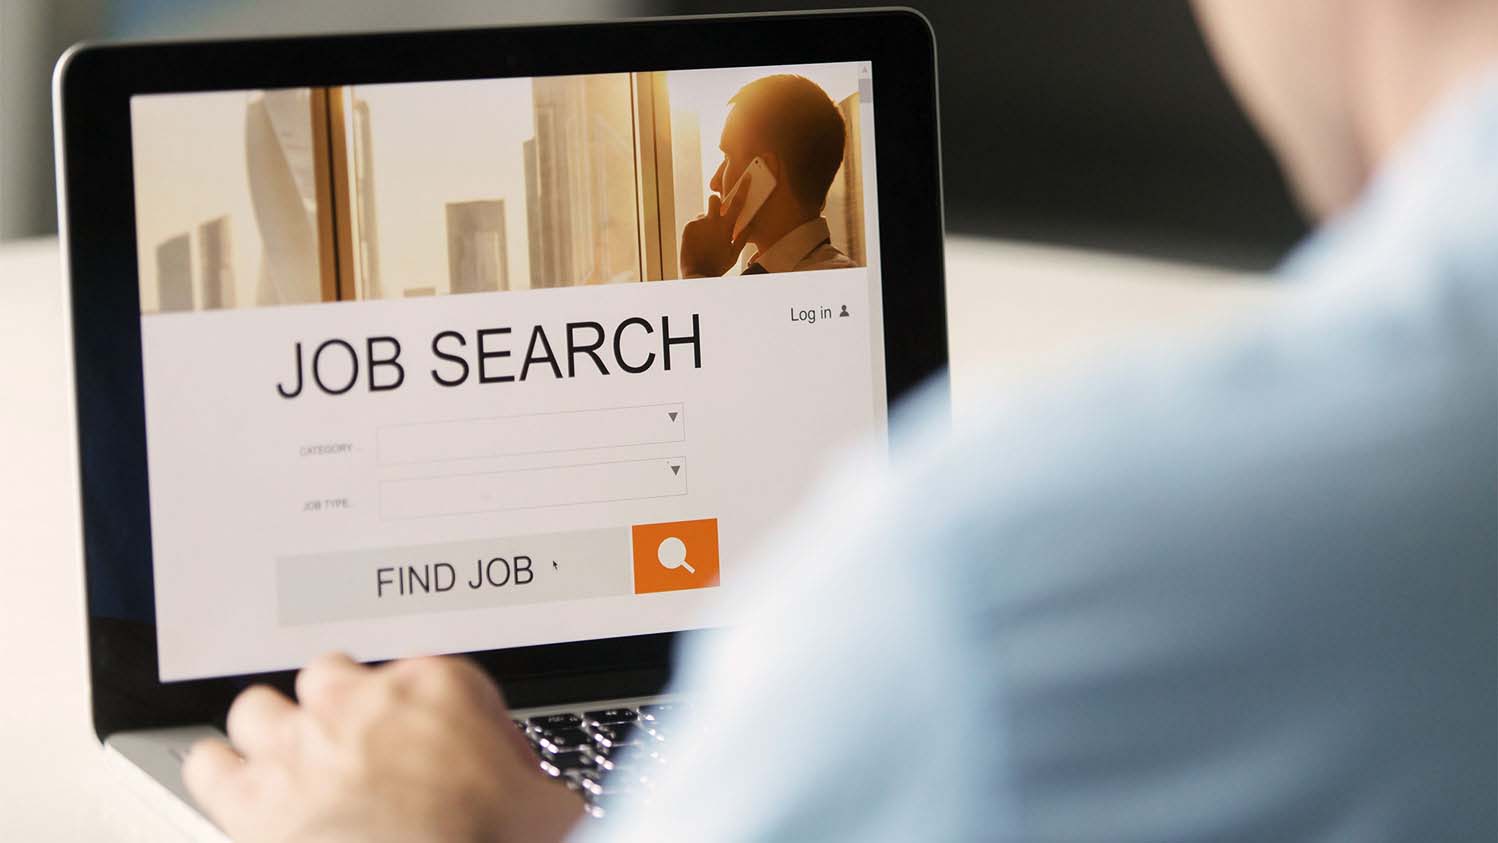 A person on a laptop performs a job search